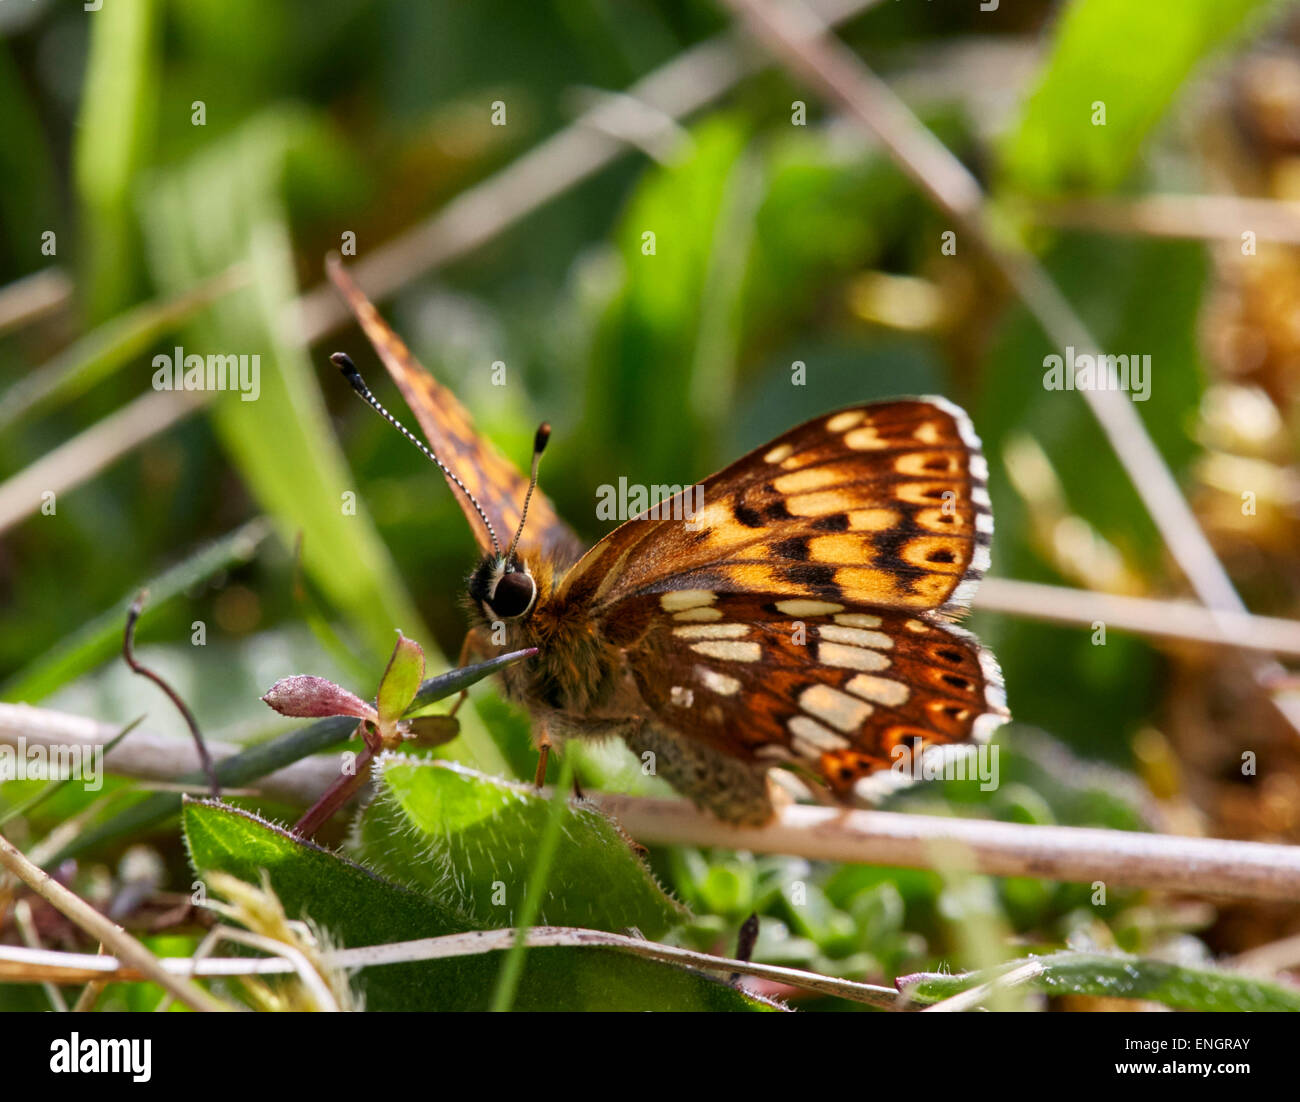 Duke of Burgundy butterfly. Noar Hill Nature Reserve, Selborne, Hampshire, England. Stock Photo